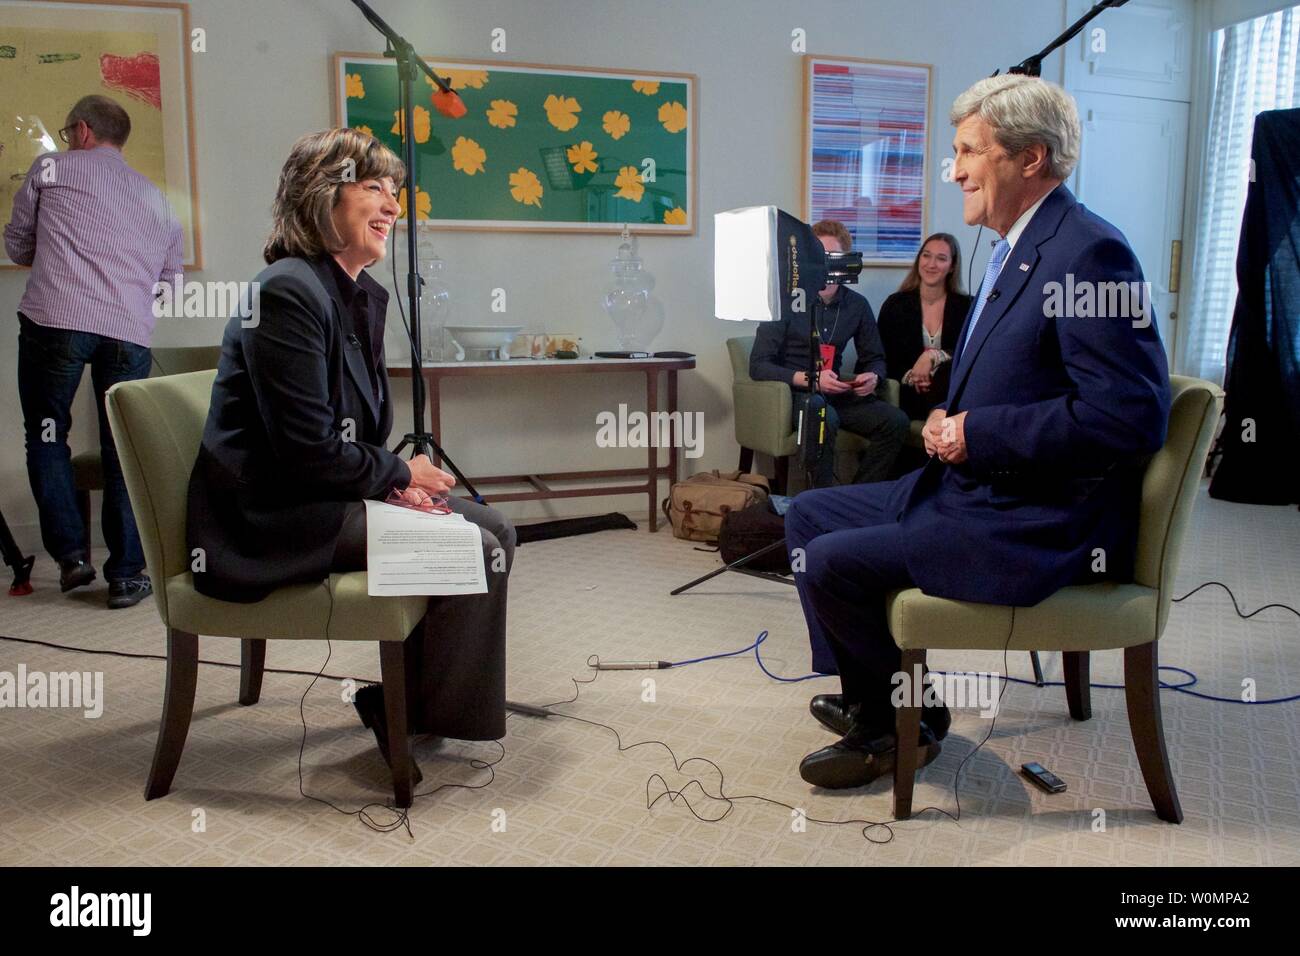 U.S. Secretary of State John Kerry shares a laugh with CNN Chief International Correspondent Christiane Amanpour before an interview at the U.S. Embassy in London, on May 10, 2016. Photo by U.S. Department of State/UPI Stock Photo